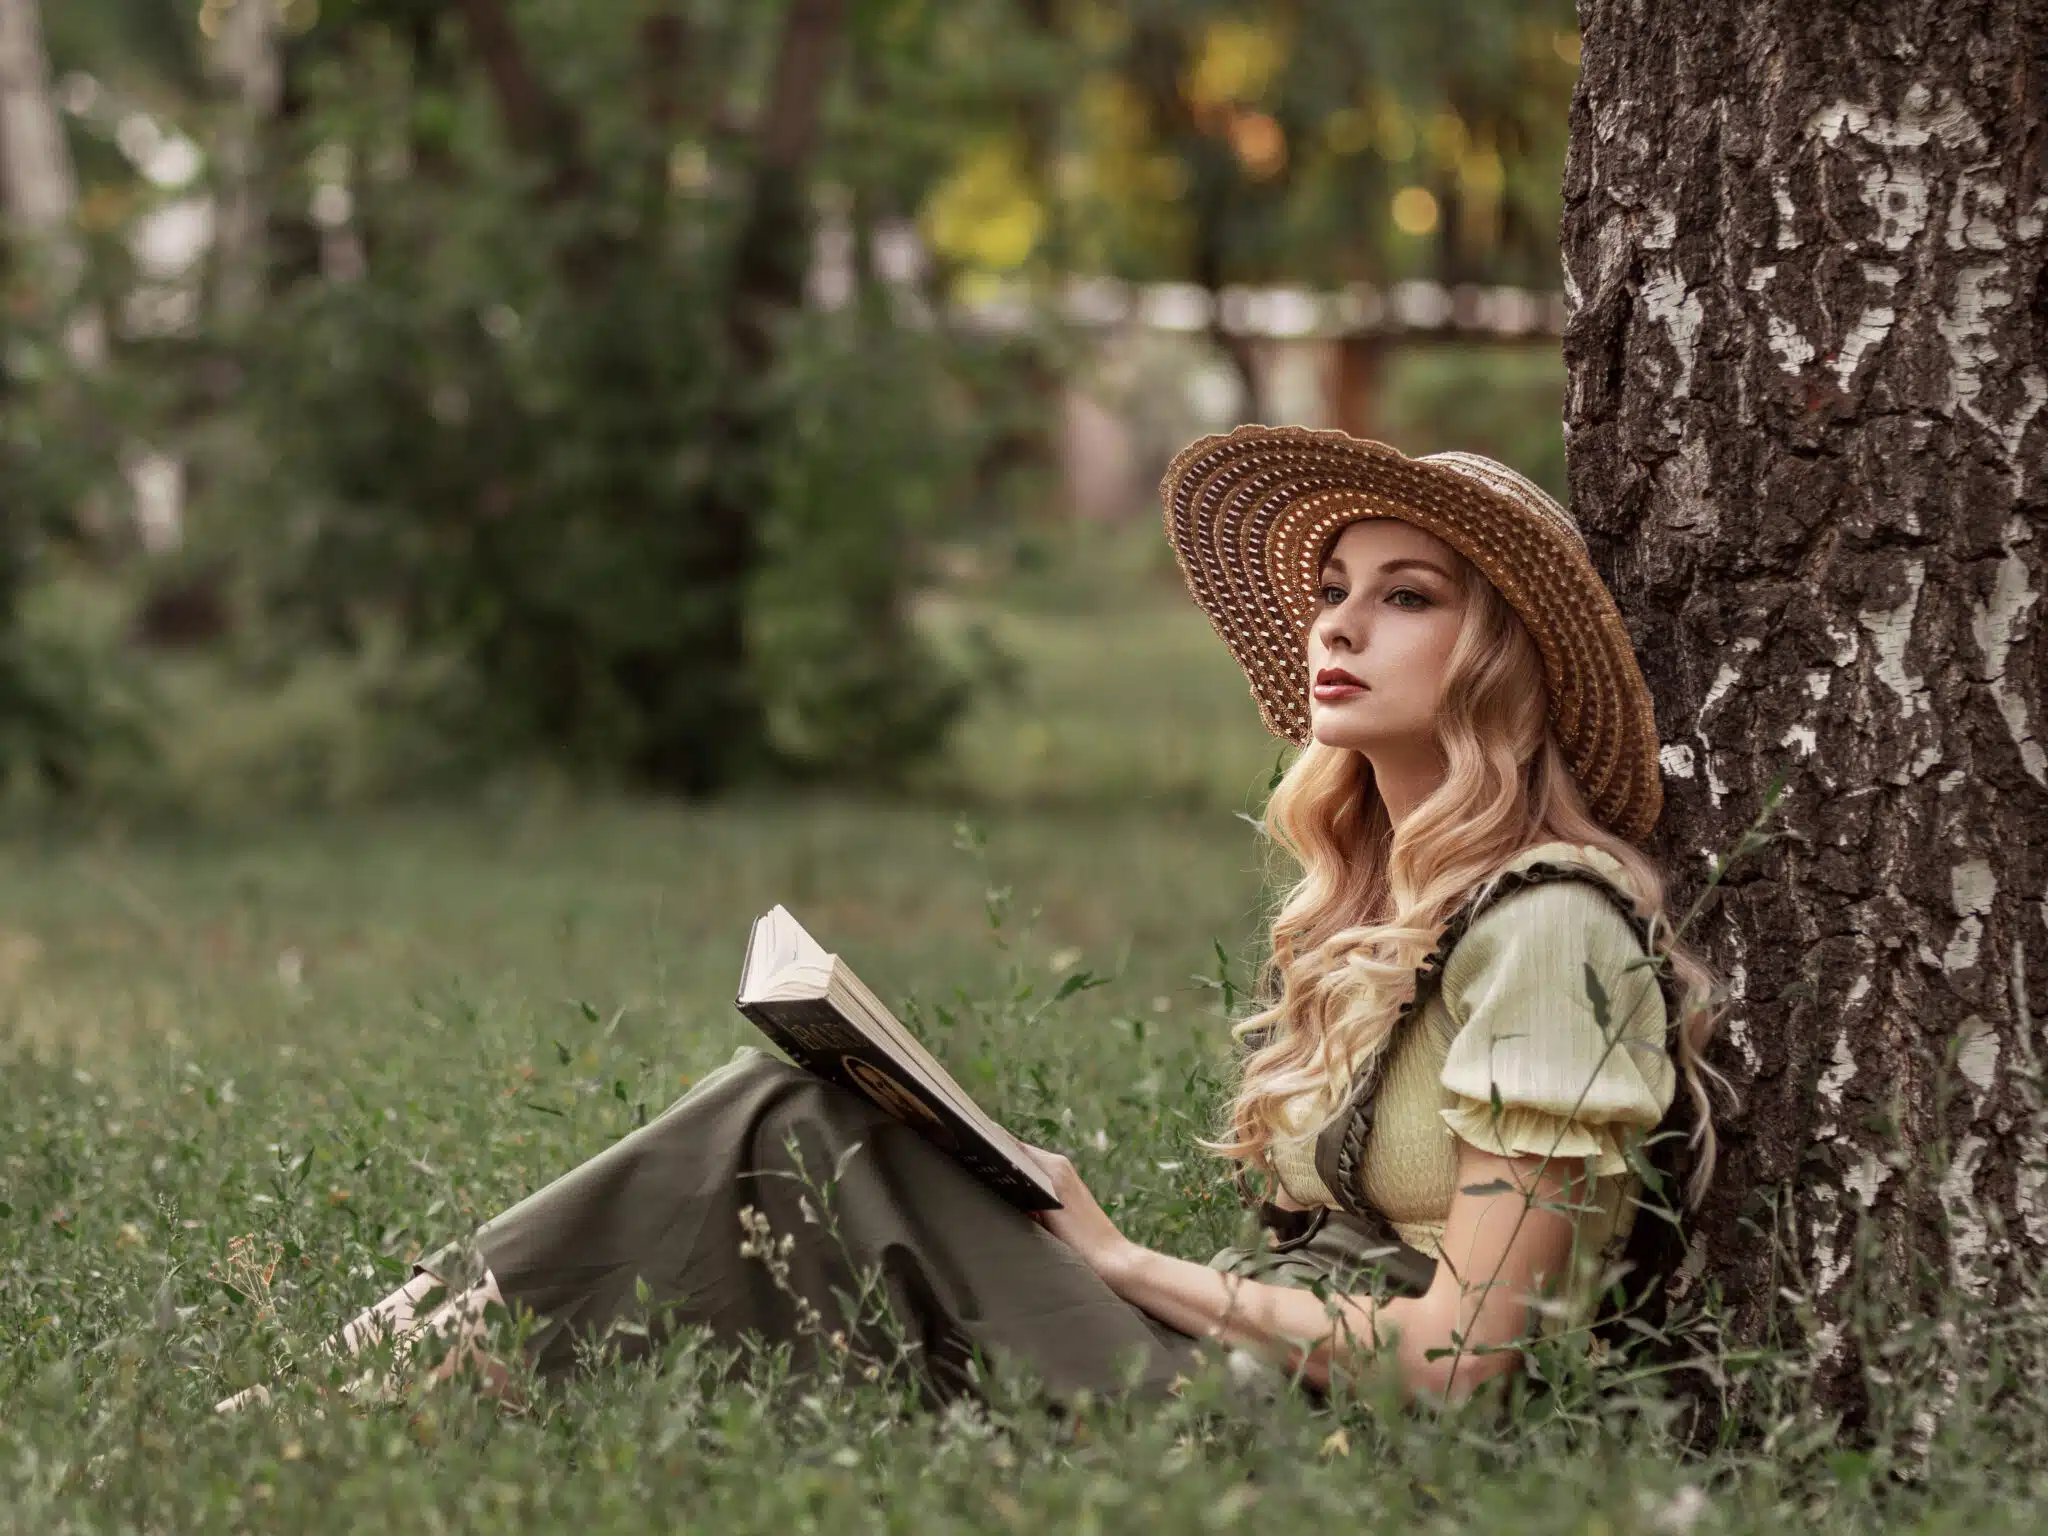 A beautiful woman with blonde hair in the park or garden reading a book